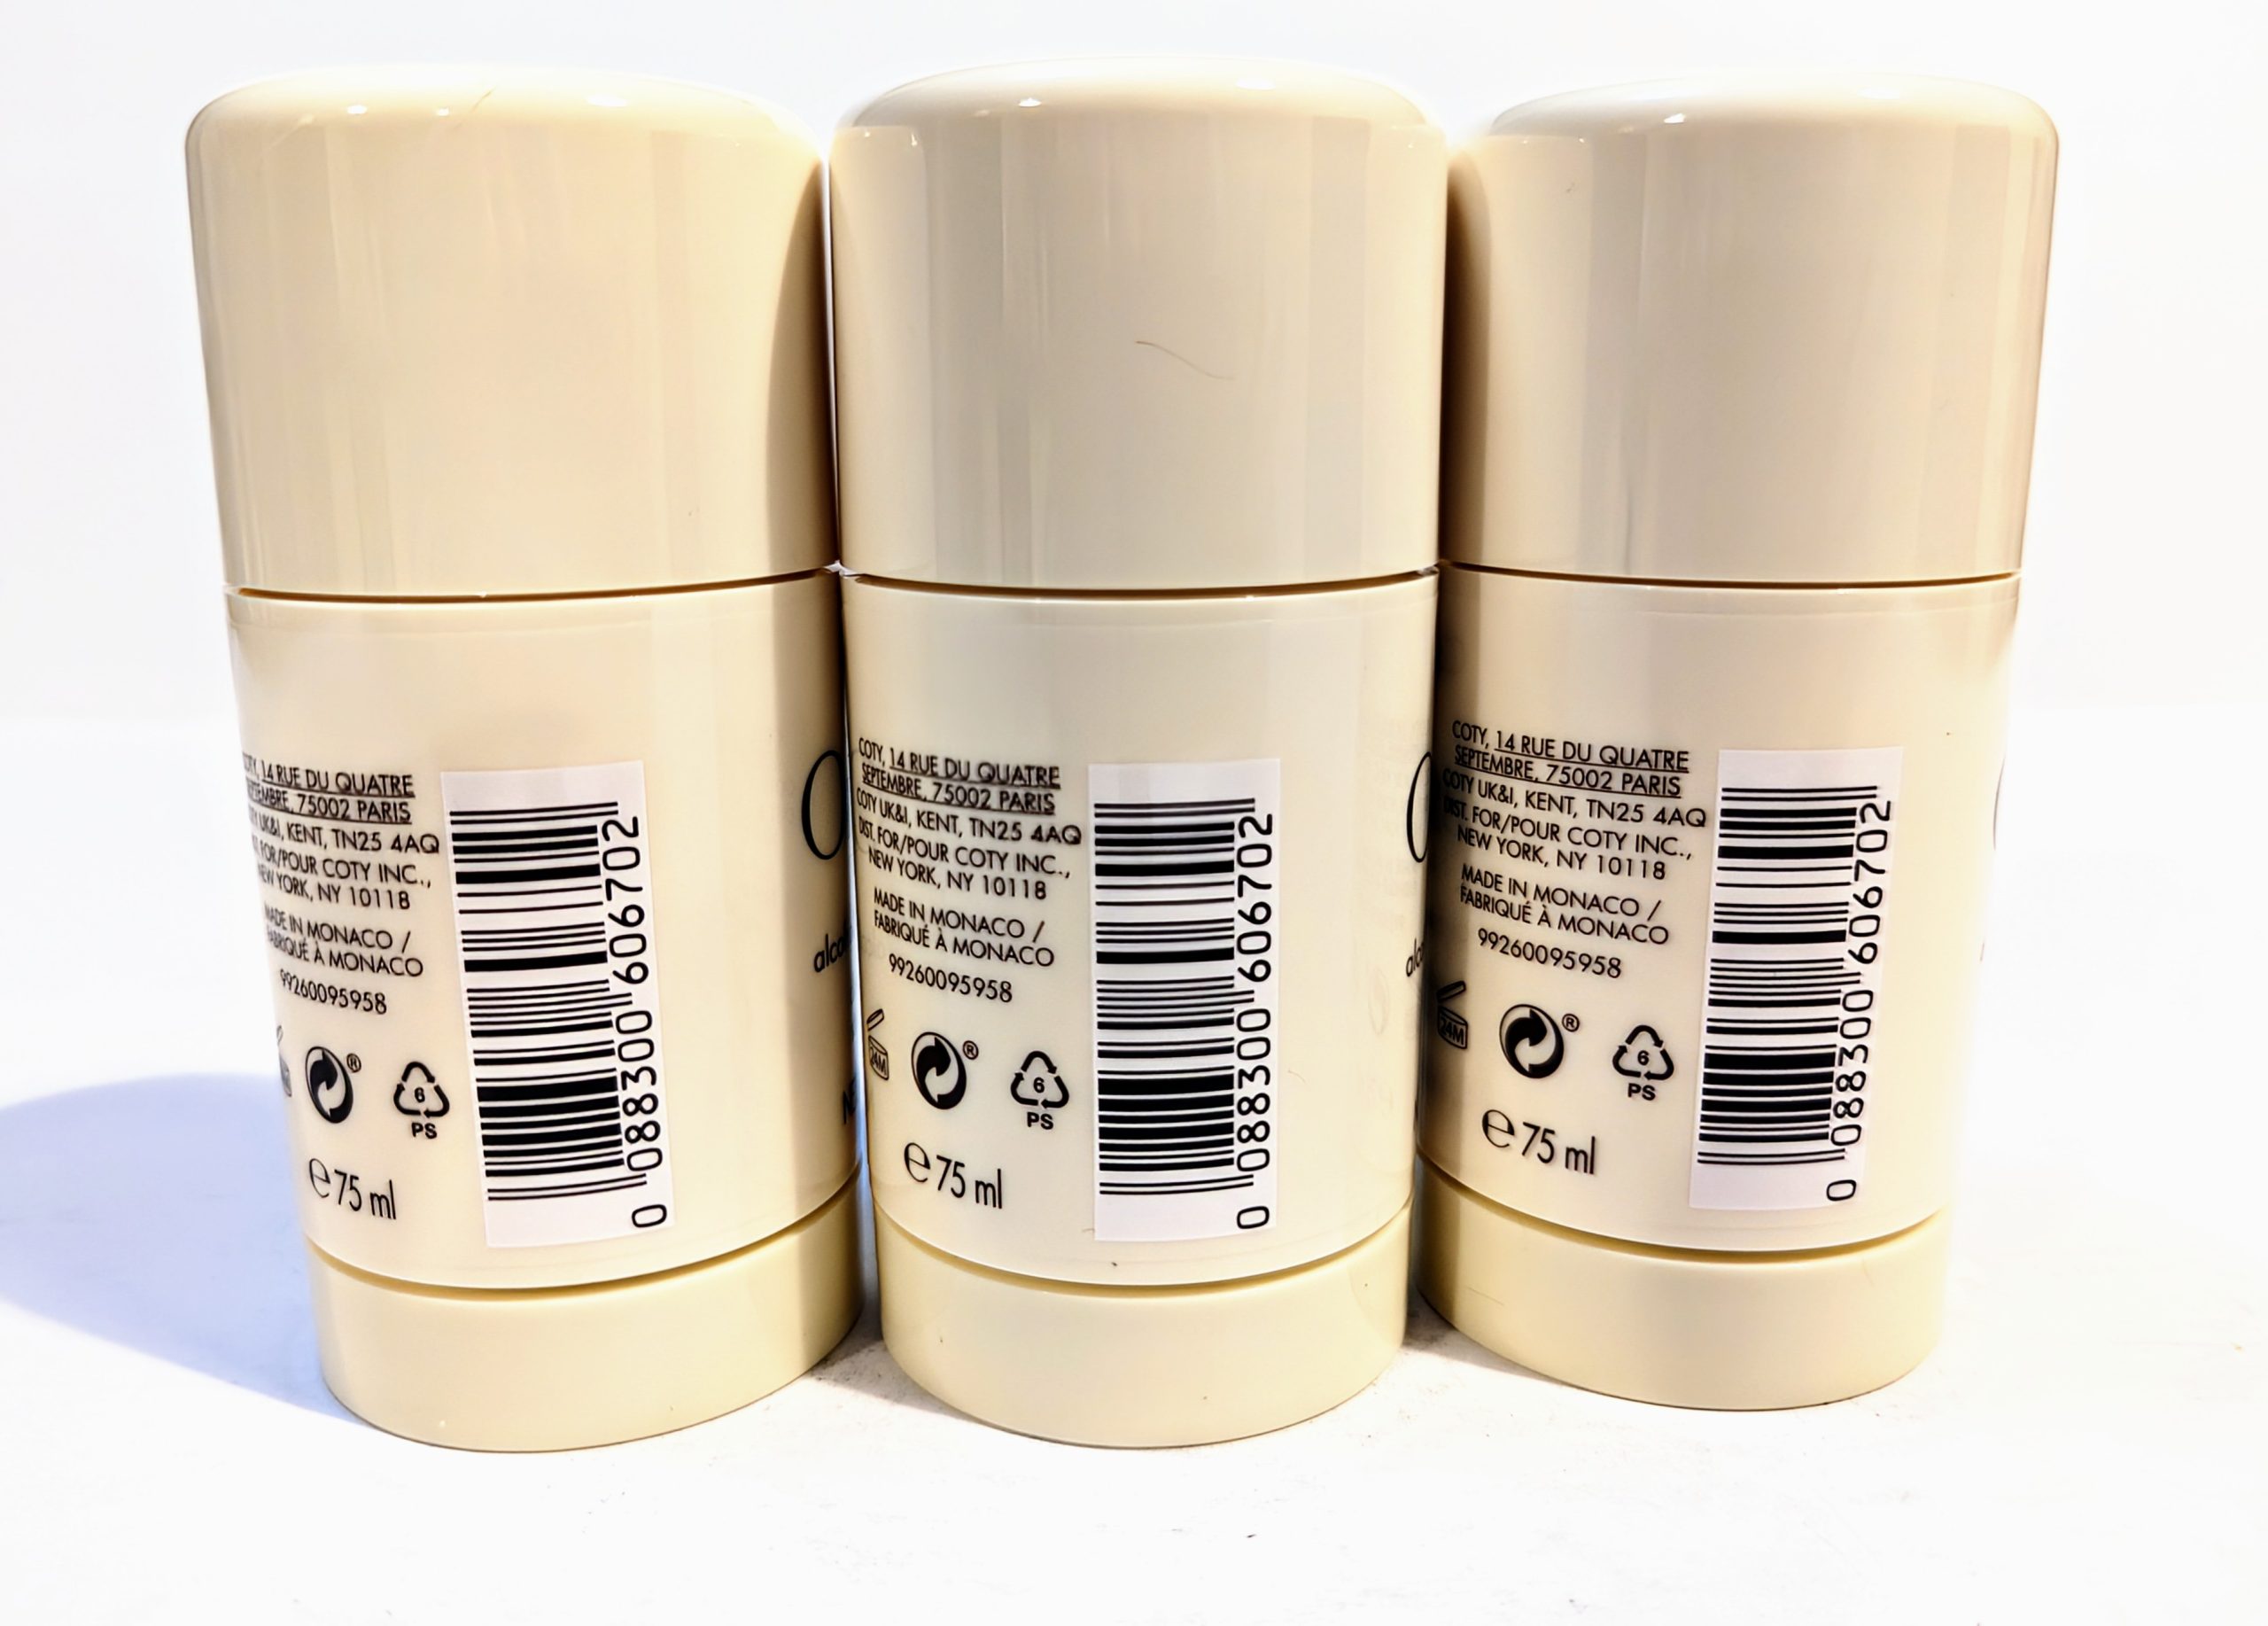 Three cream-colored cylindrical deodorant bottles with barcode labels and recycling symbols, standing upright in a row against a white background.